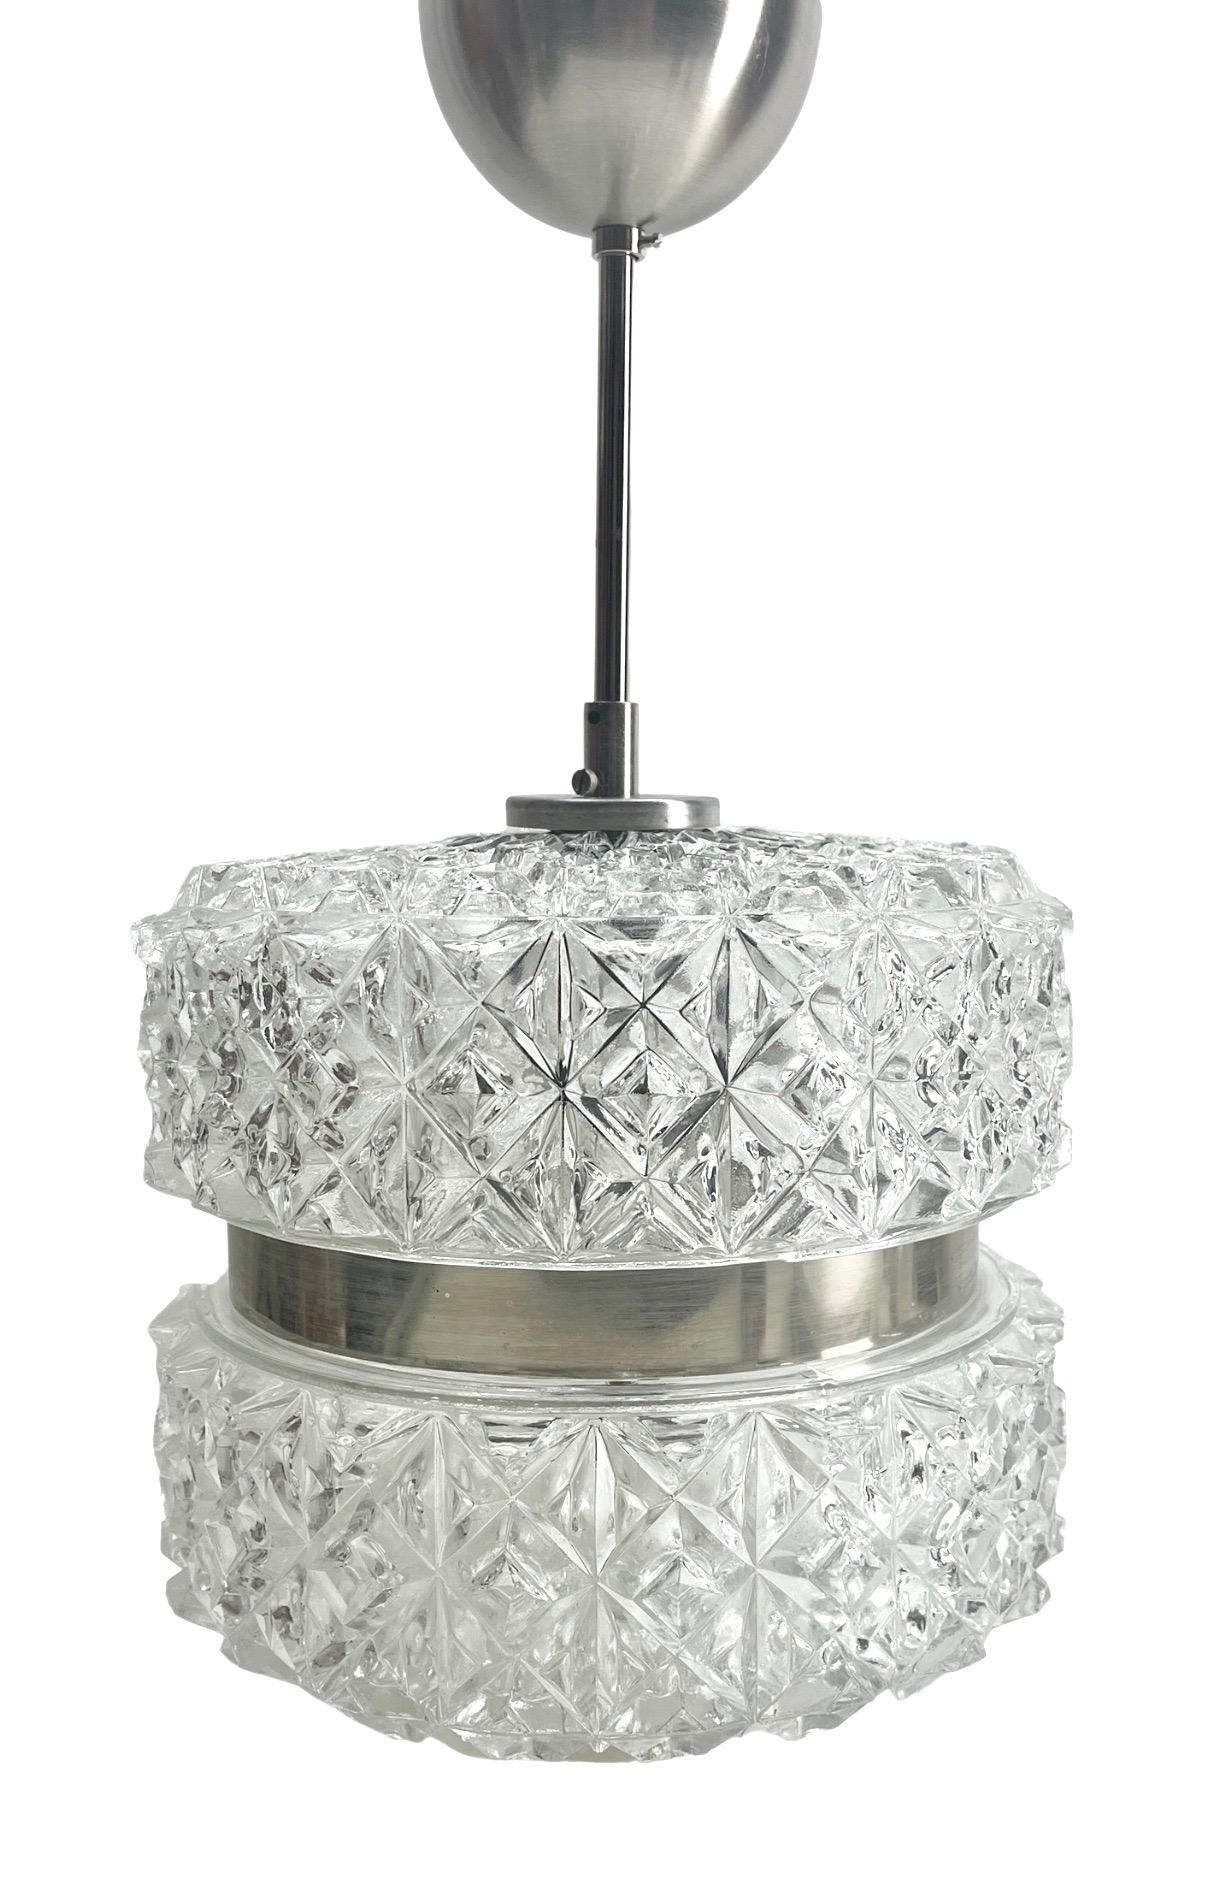 From the range by the Massive Company, this center-light features 1 lamp on a central chromed stem. Lamp has a fitting on a chromed plate, of clear glass sculpted to produce a circle
In good condition and in full working order with 1 standard NEW